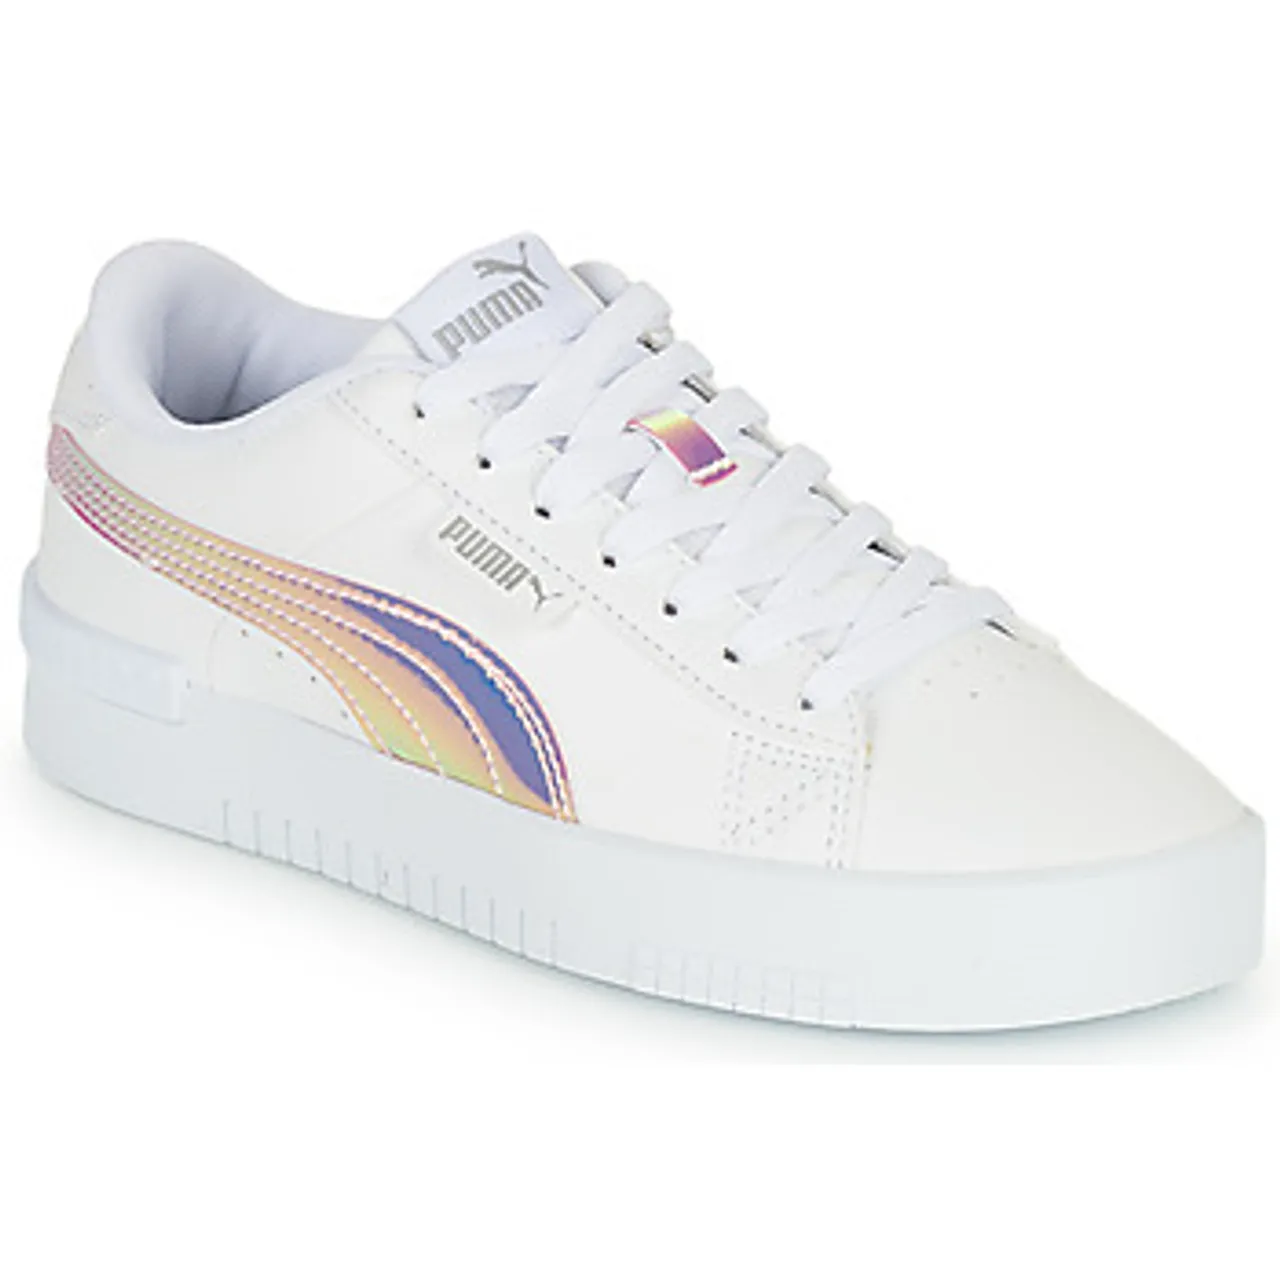 Puma  Jada Holo Jr  girls's Children's Shoes (Trainers) in White